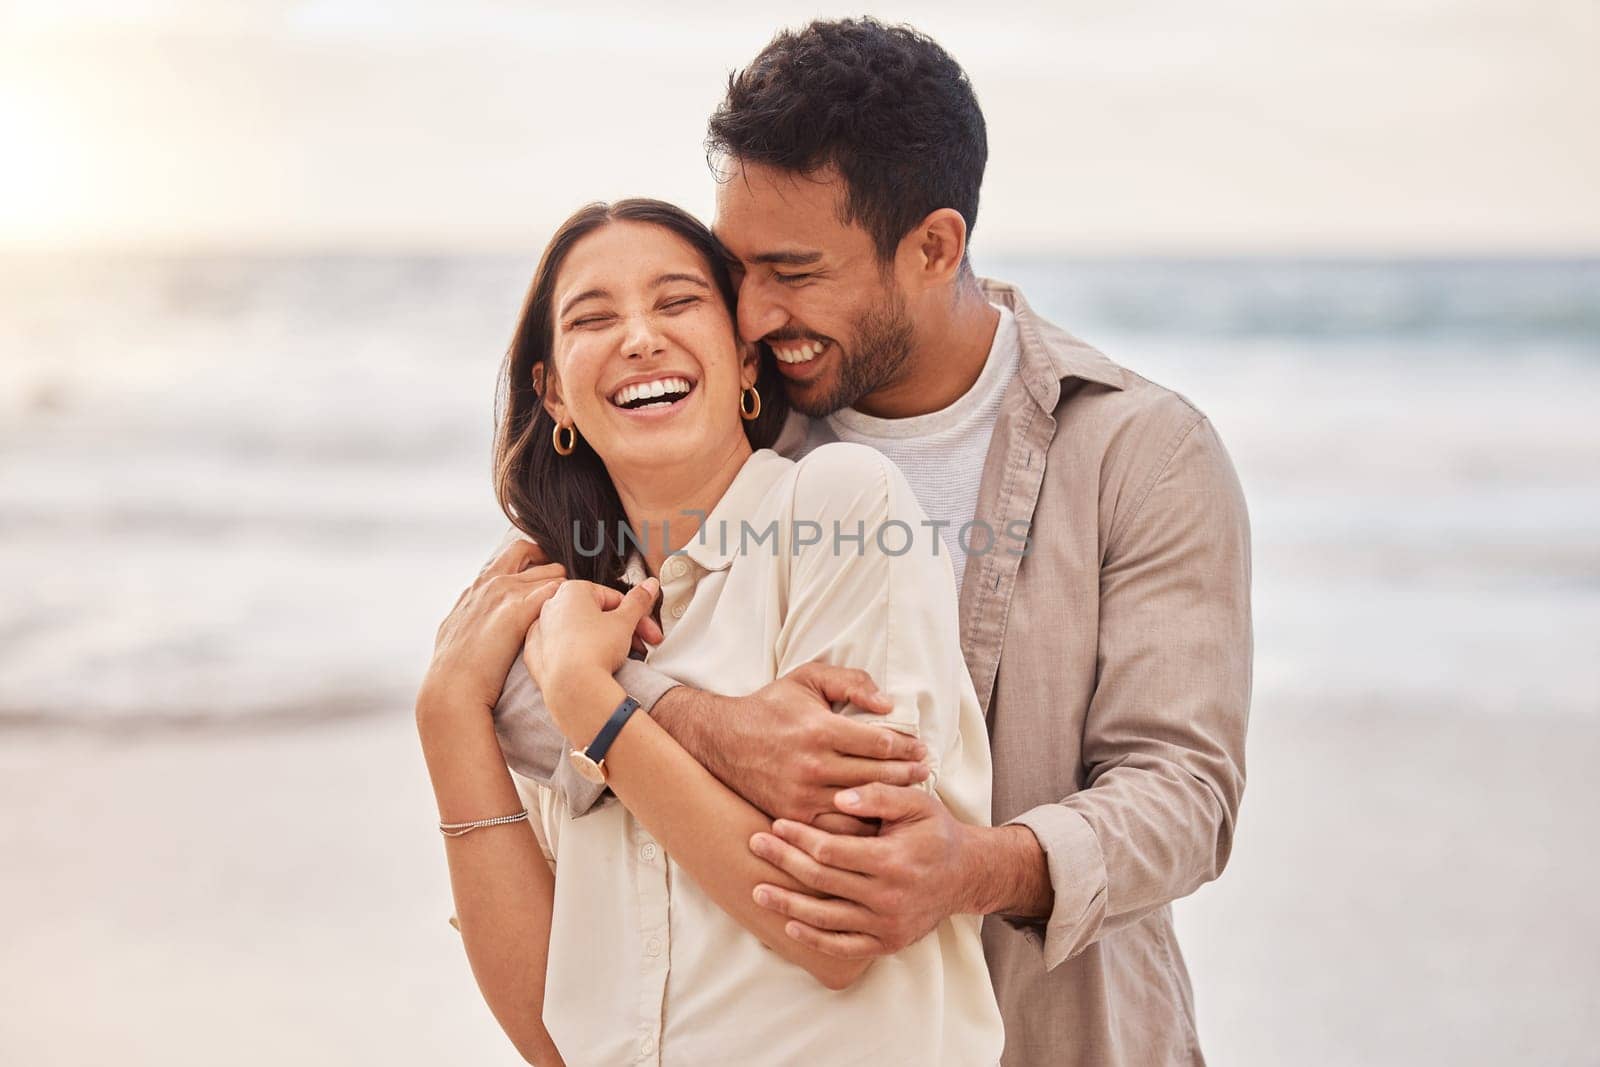 Together, beach and happiness with hug on holiday for having fun with sunset for the weekend. Couple, vacation and laughing with face at the ocean for travel in the summer for a relaxing time